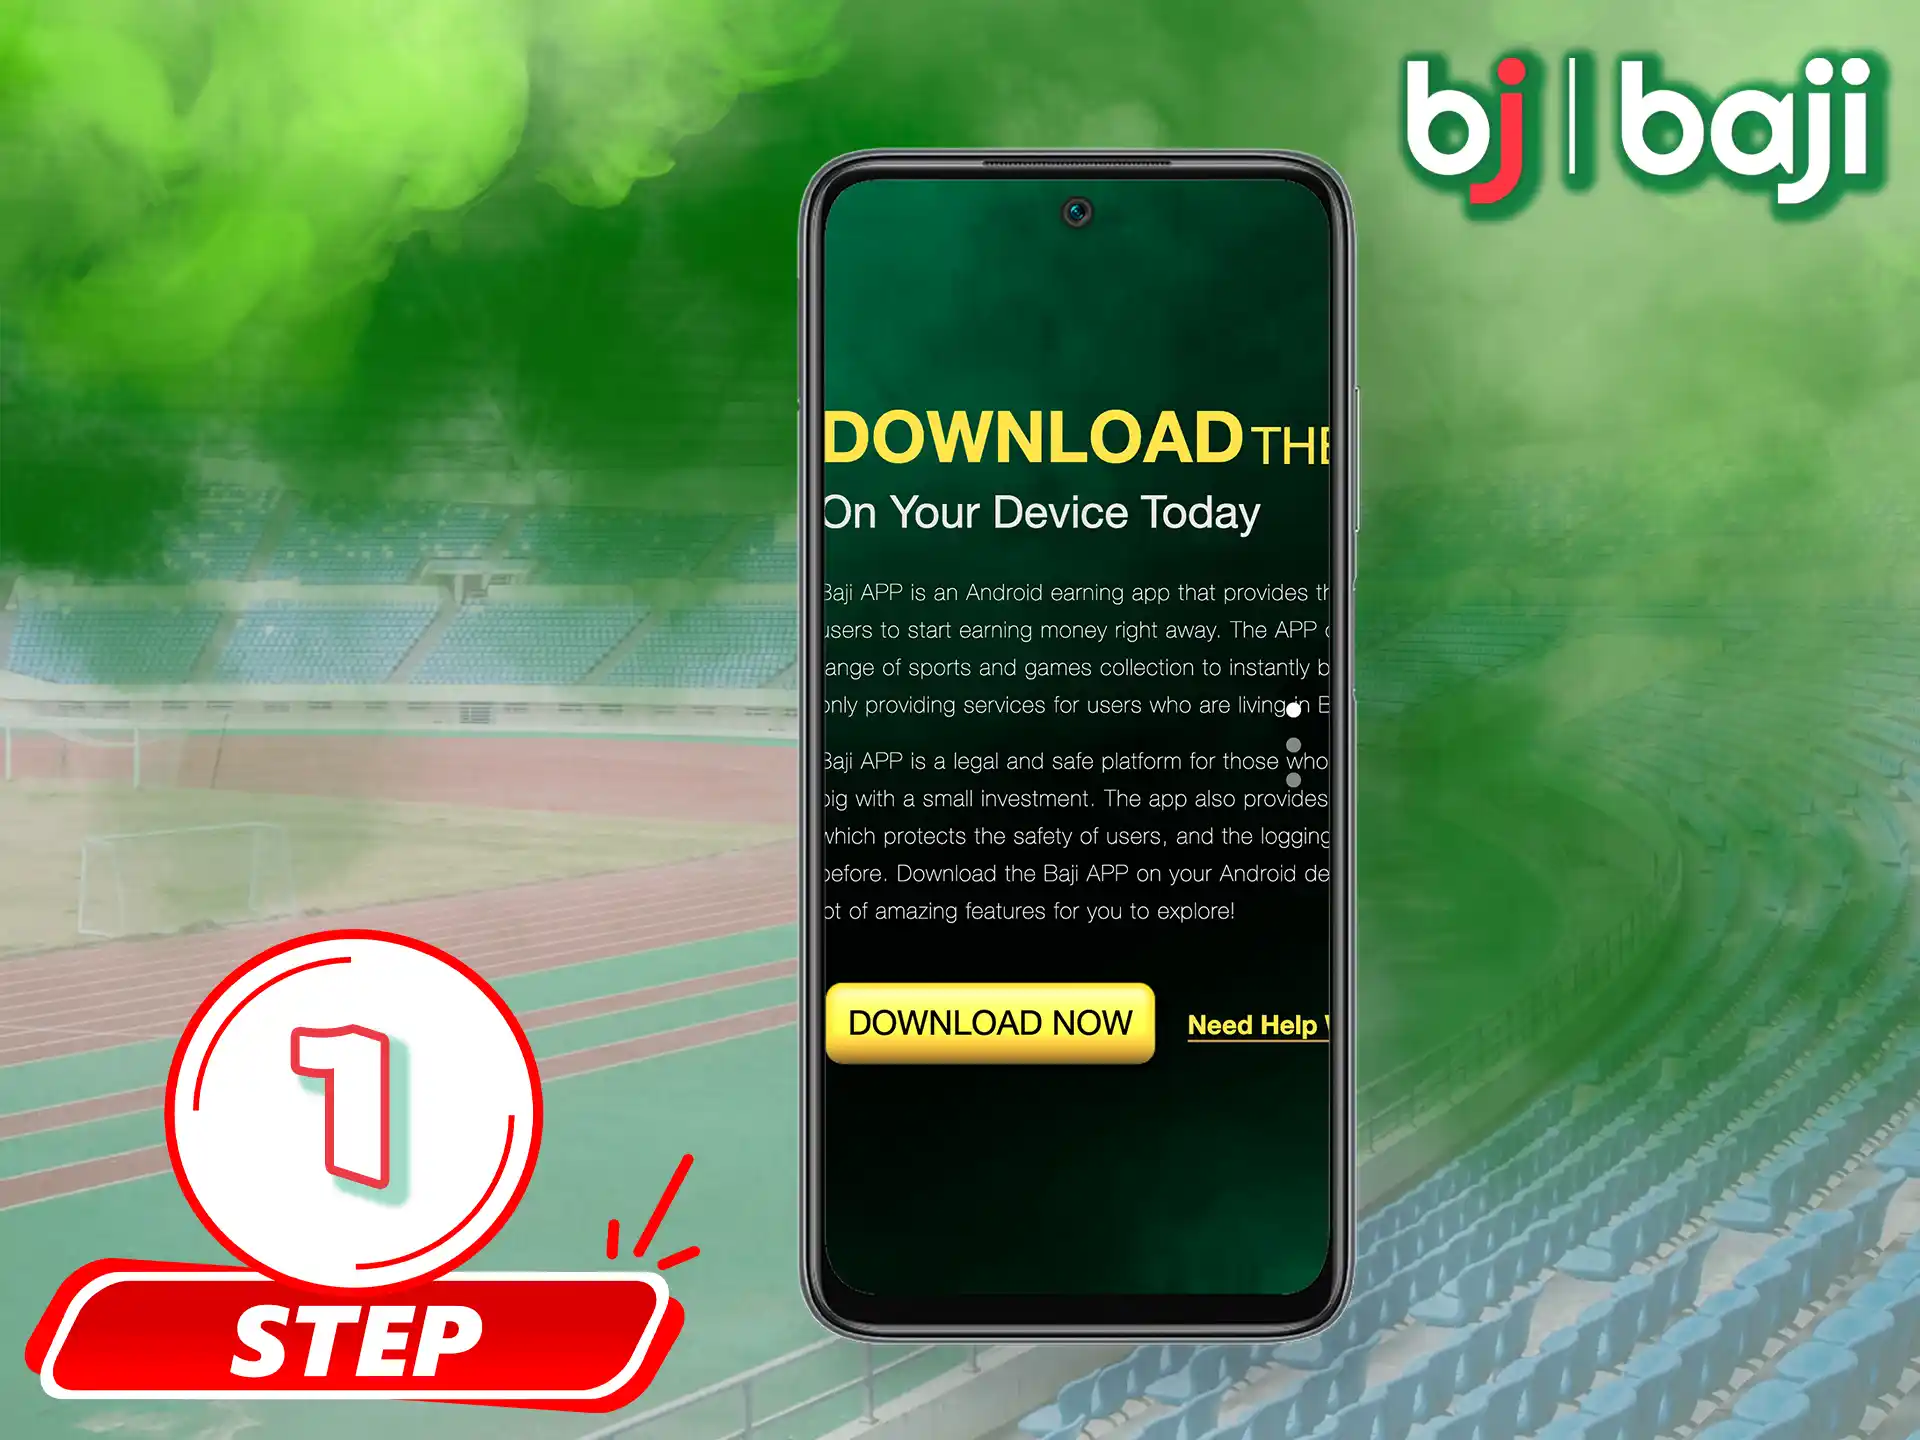 Start your journey into the world of betting by getting an installation file of the Baji app.